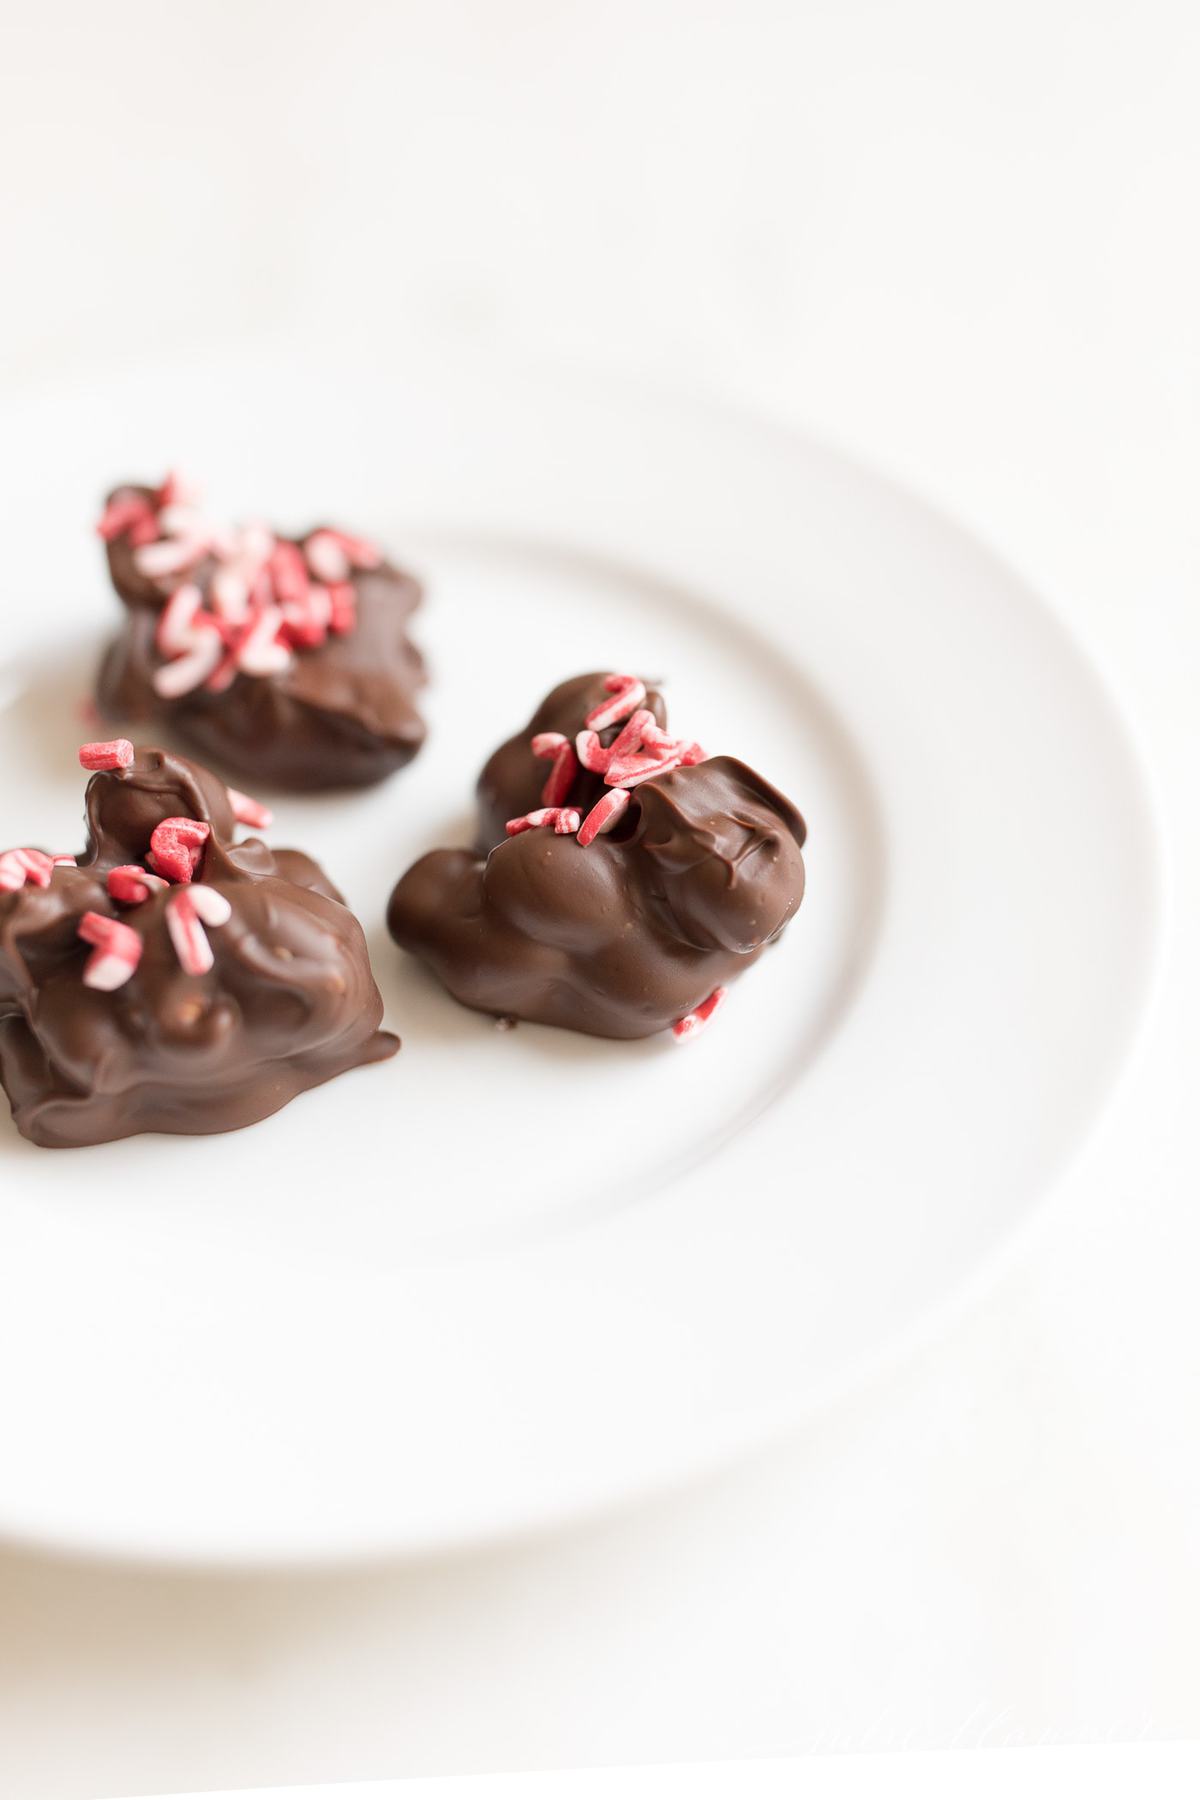 3 peanut clusters with sprinkles on a plate